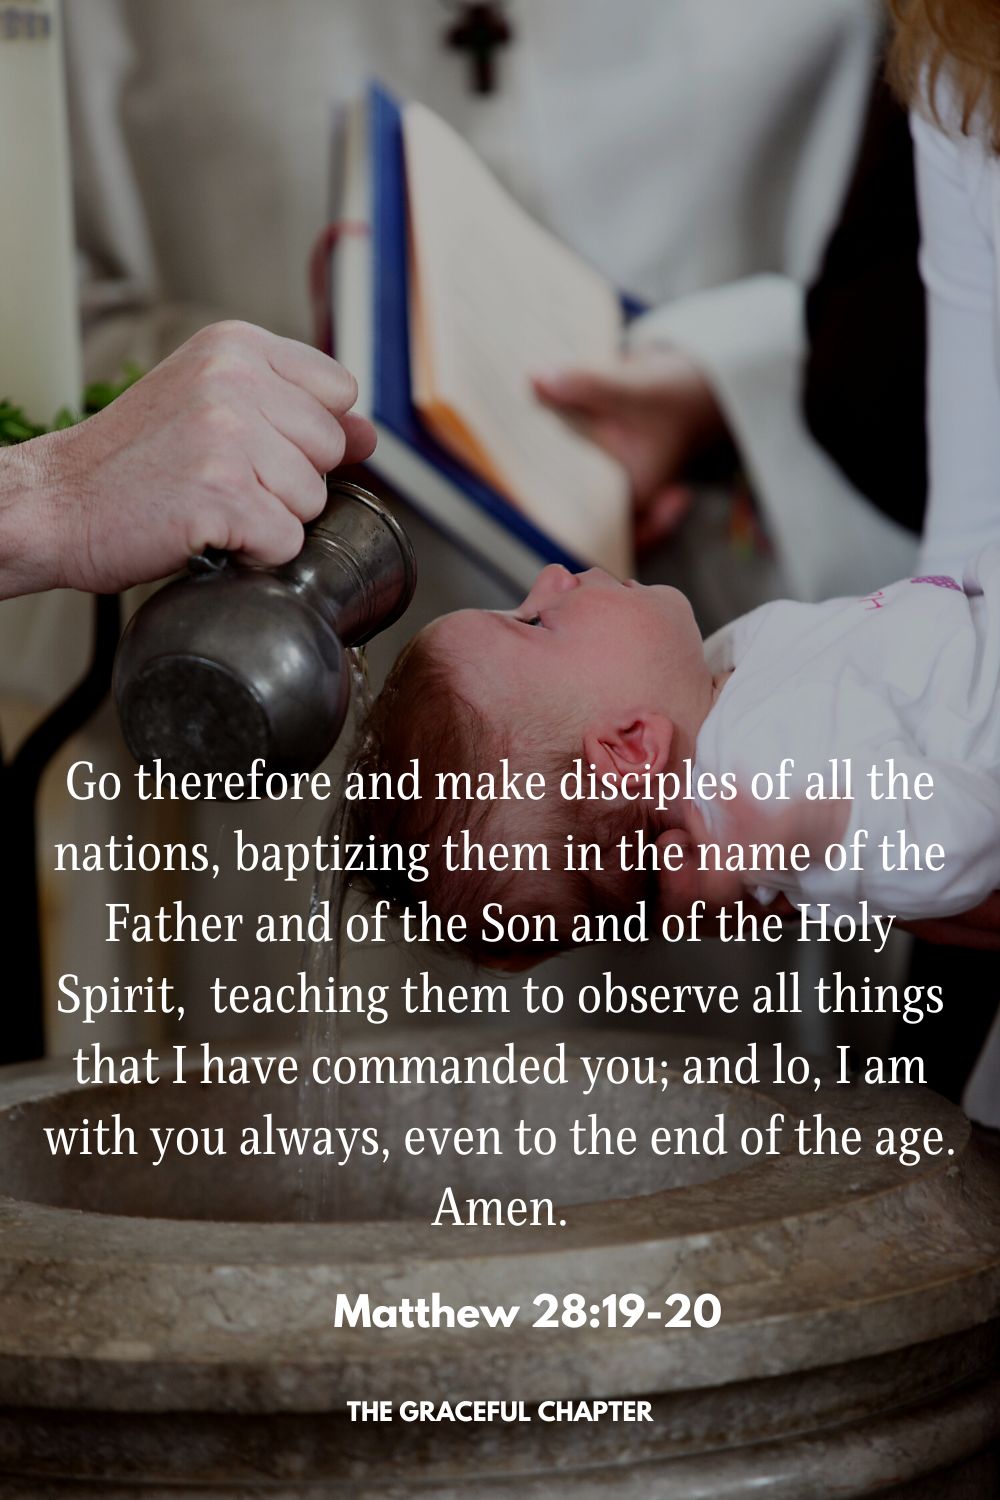 Go therefore and make disciples of all the nations, baptizing them in the name of the Father and of the Son and of the Holy Spirit,  teaching them to observe all things that I have commanded you; and lo, I am with you always, even to the end of the age. Amen. Matthew 28:19-20